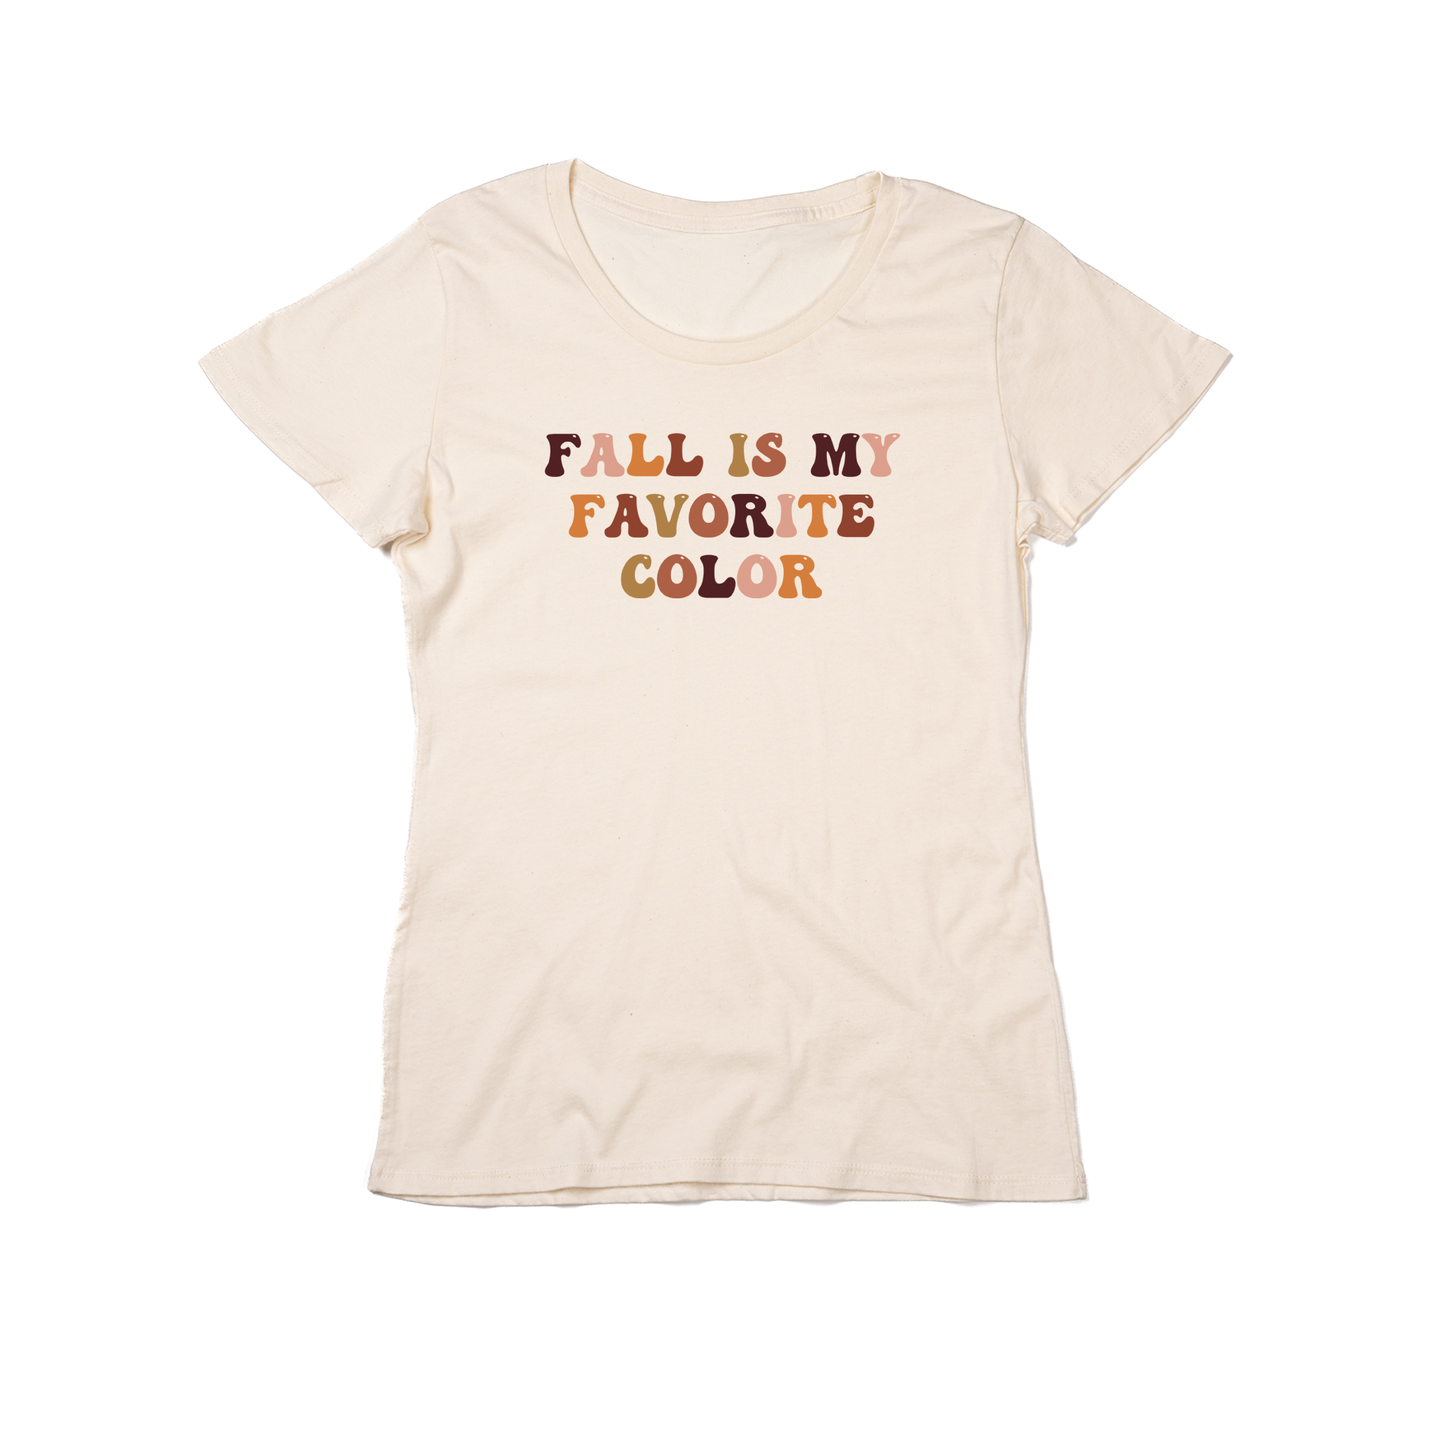 Fall is my favorite color - Women's Fitted Tee (Natural)